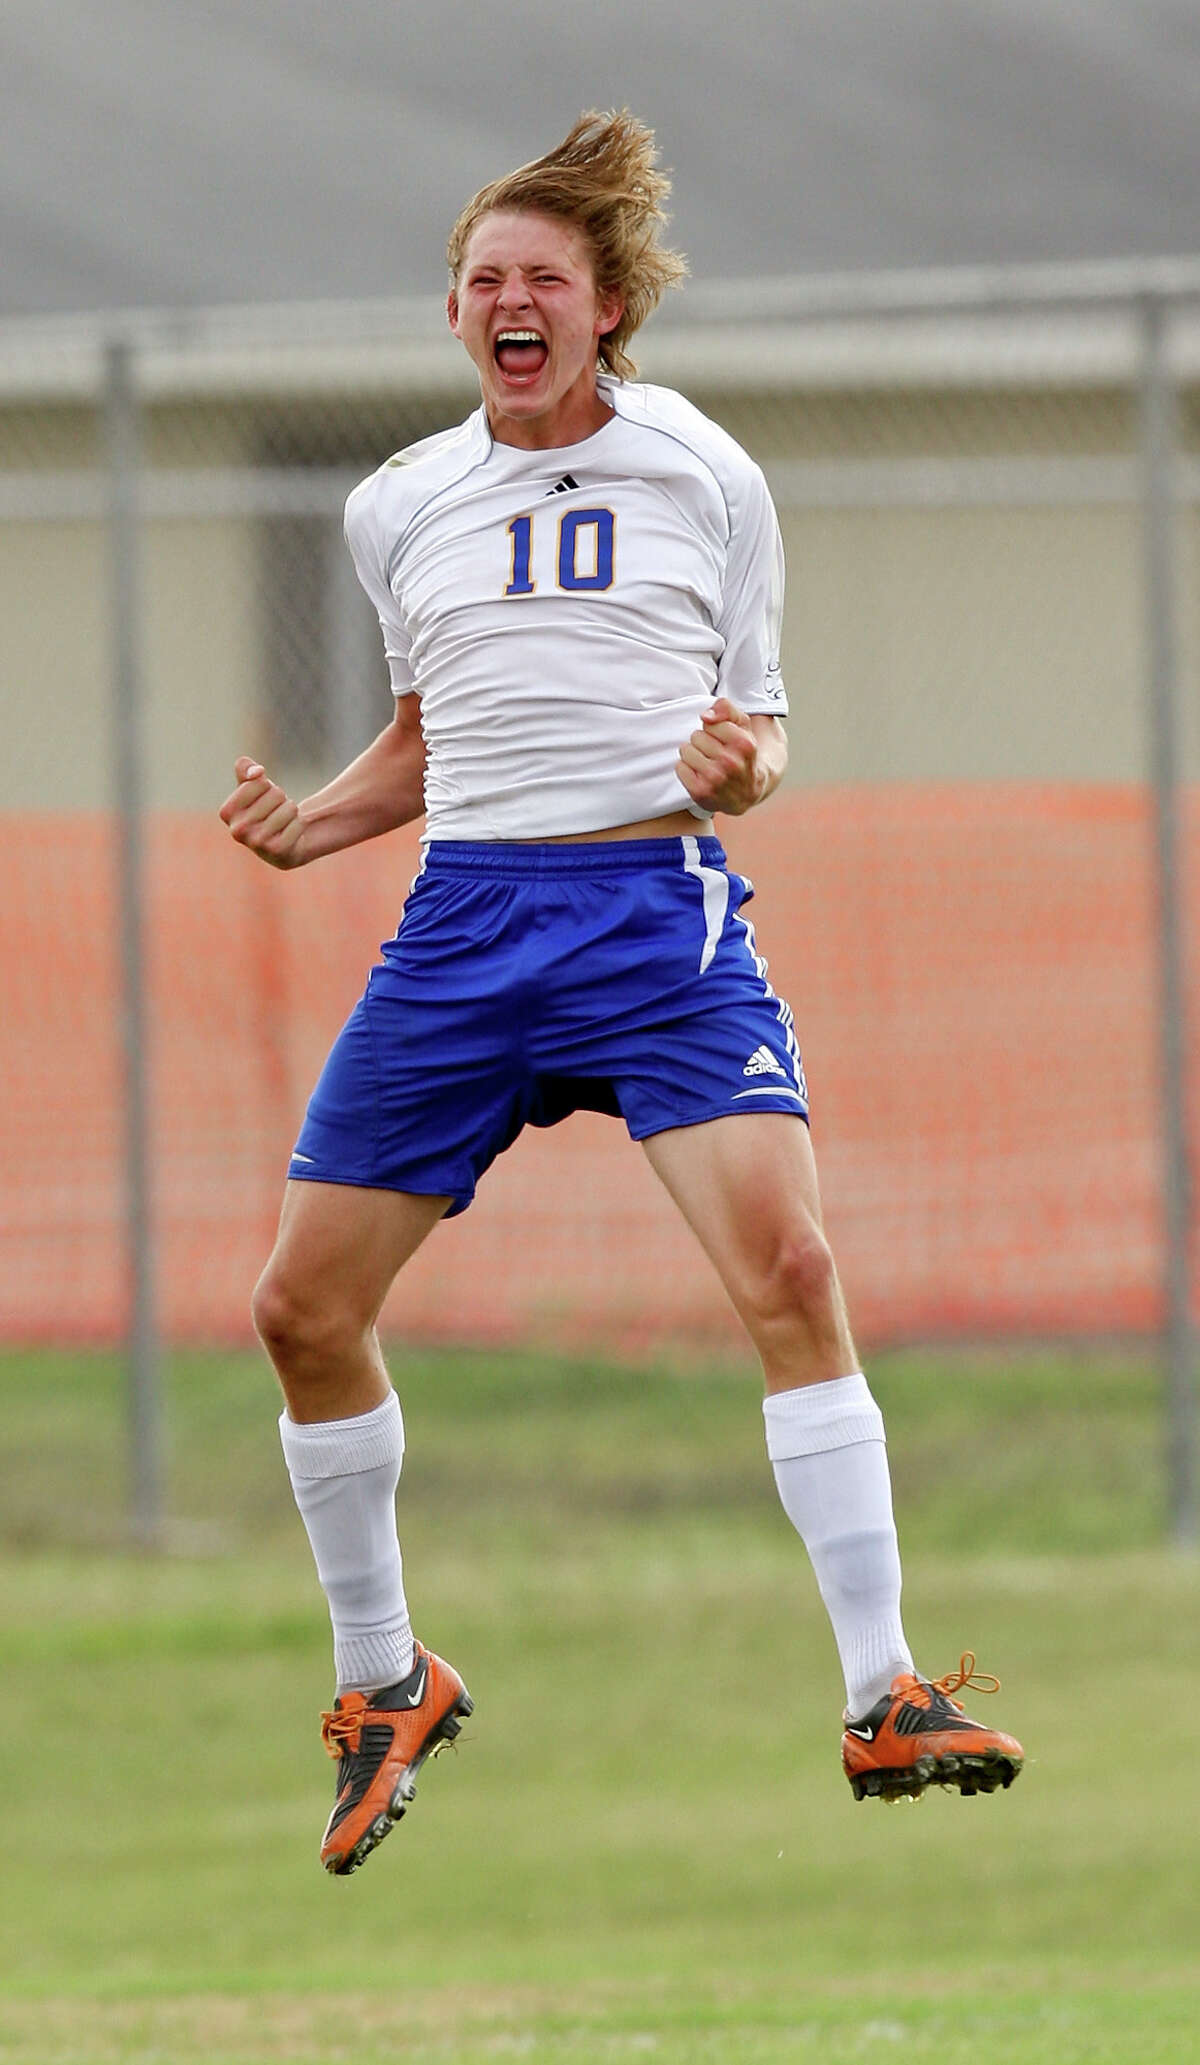 Senior Matt Struble leads Alamo Heights with 17 goals. Fourteen Mules players have scored a goal this season.